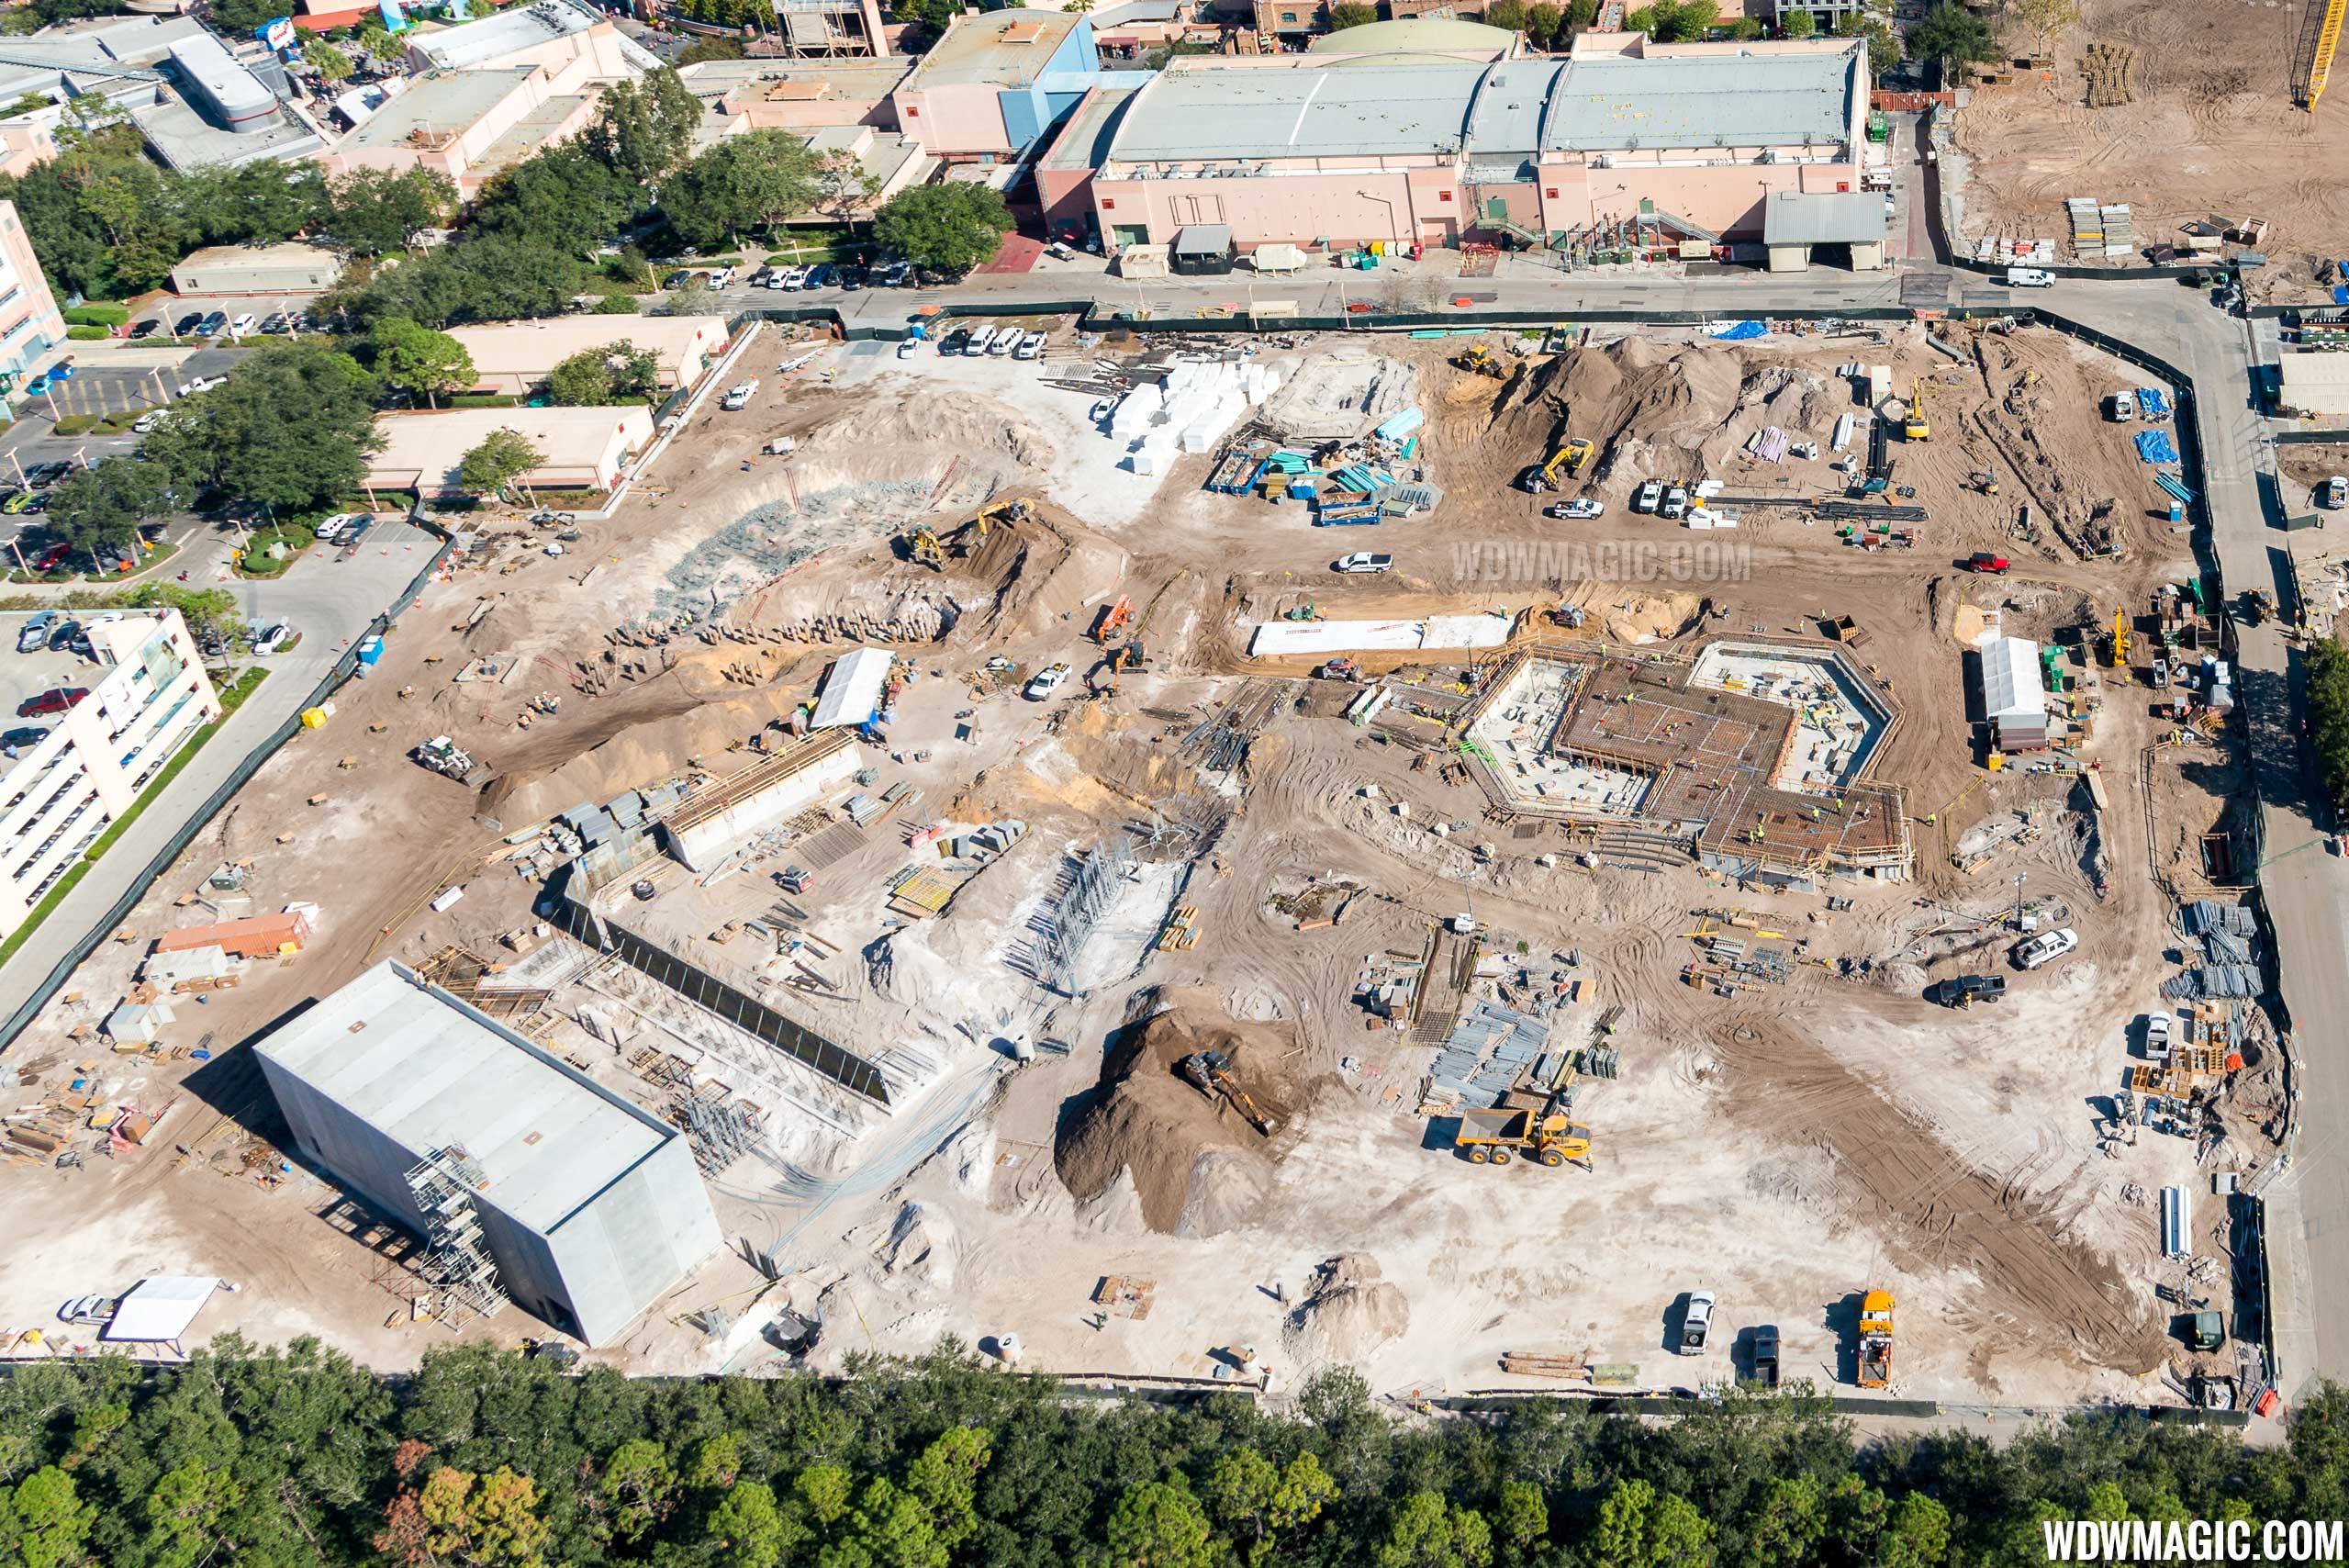 PHOTOS - Overhead view of construction at Disney's Hollywood Studios Toy Story Land